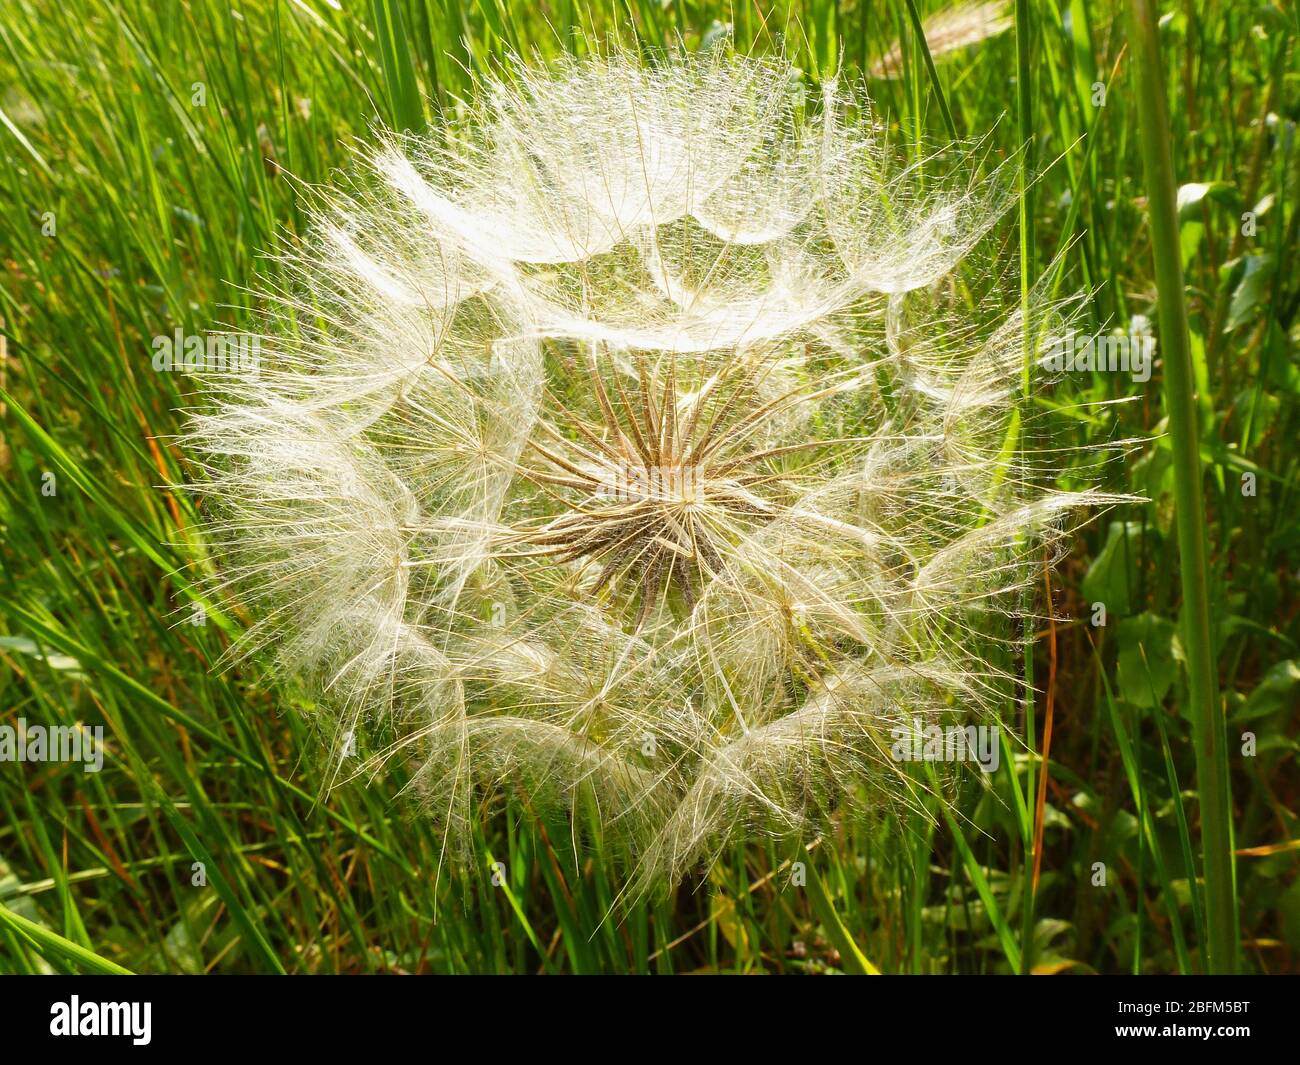 fluffy white red seeded common dandelion in bright green spring grass. abstract composition in green and white. Taraxacum erythrospermum, lush foliage Stock Photo